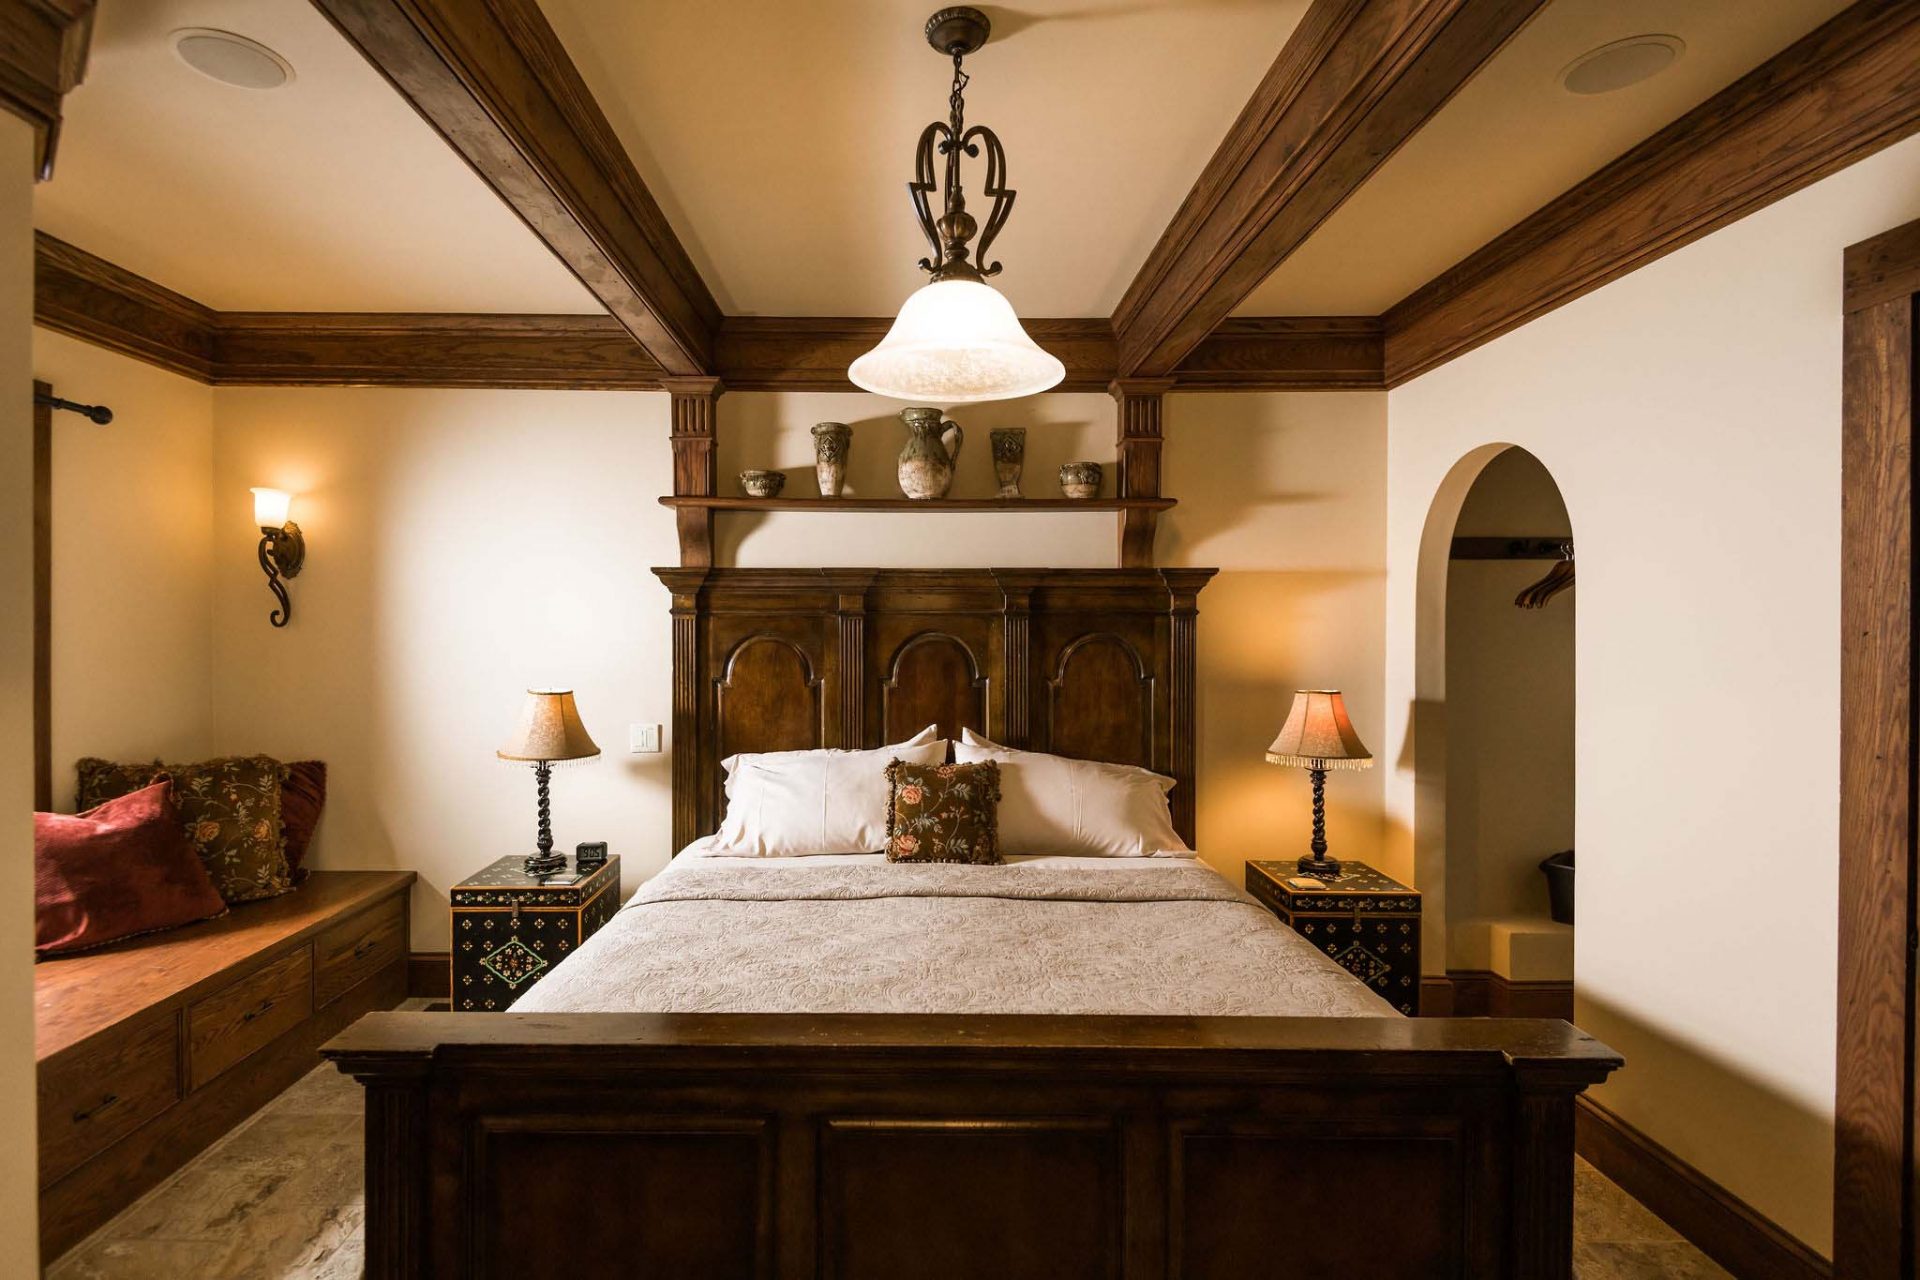 A king bedroom in dark wood with tiled floors. Broad wooden window sill with cushions, dark wooden bed frame with a decorative headboard, two ornamented night stands with lamps.